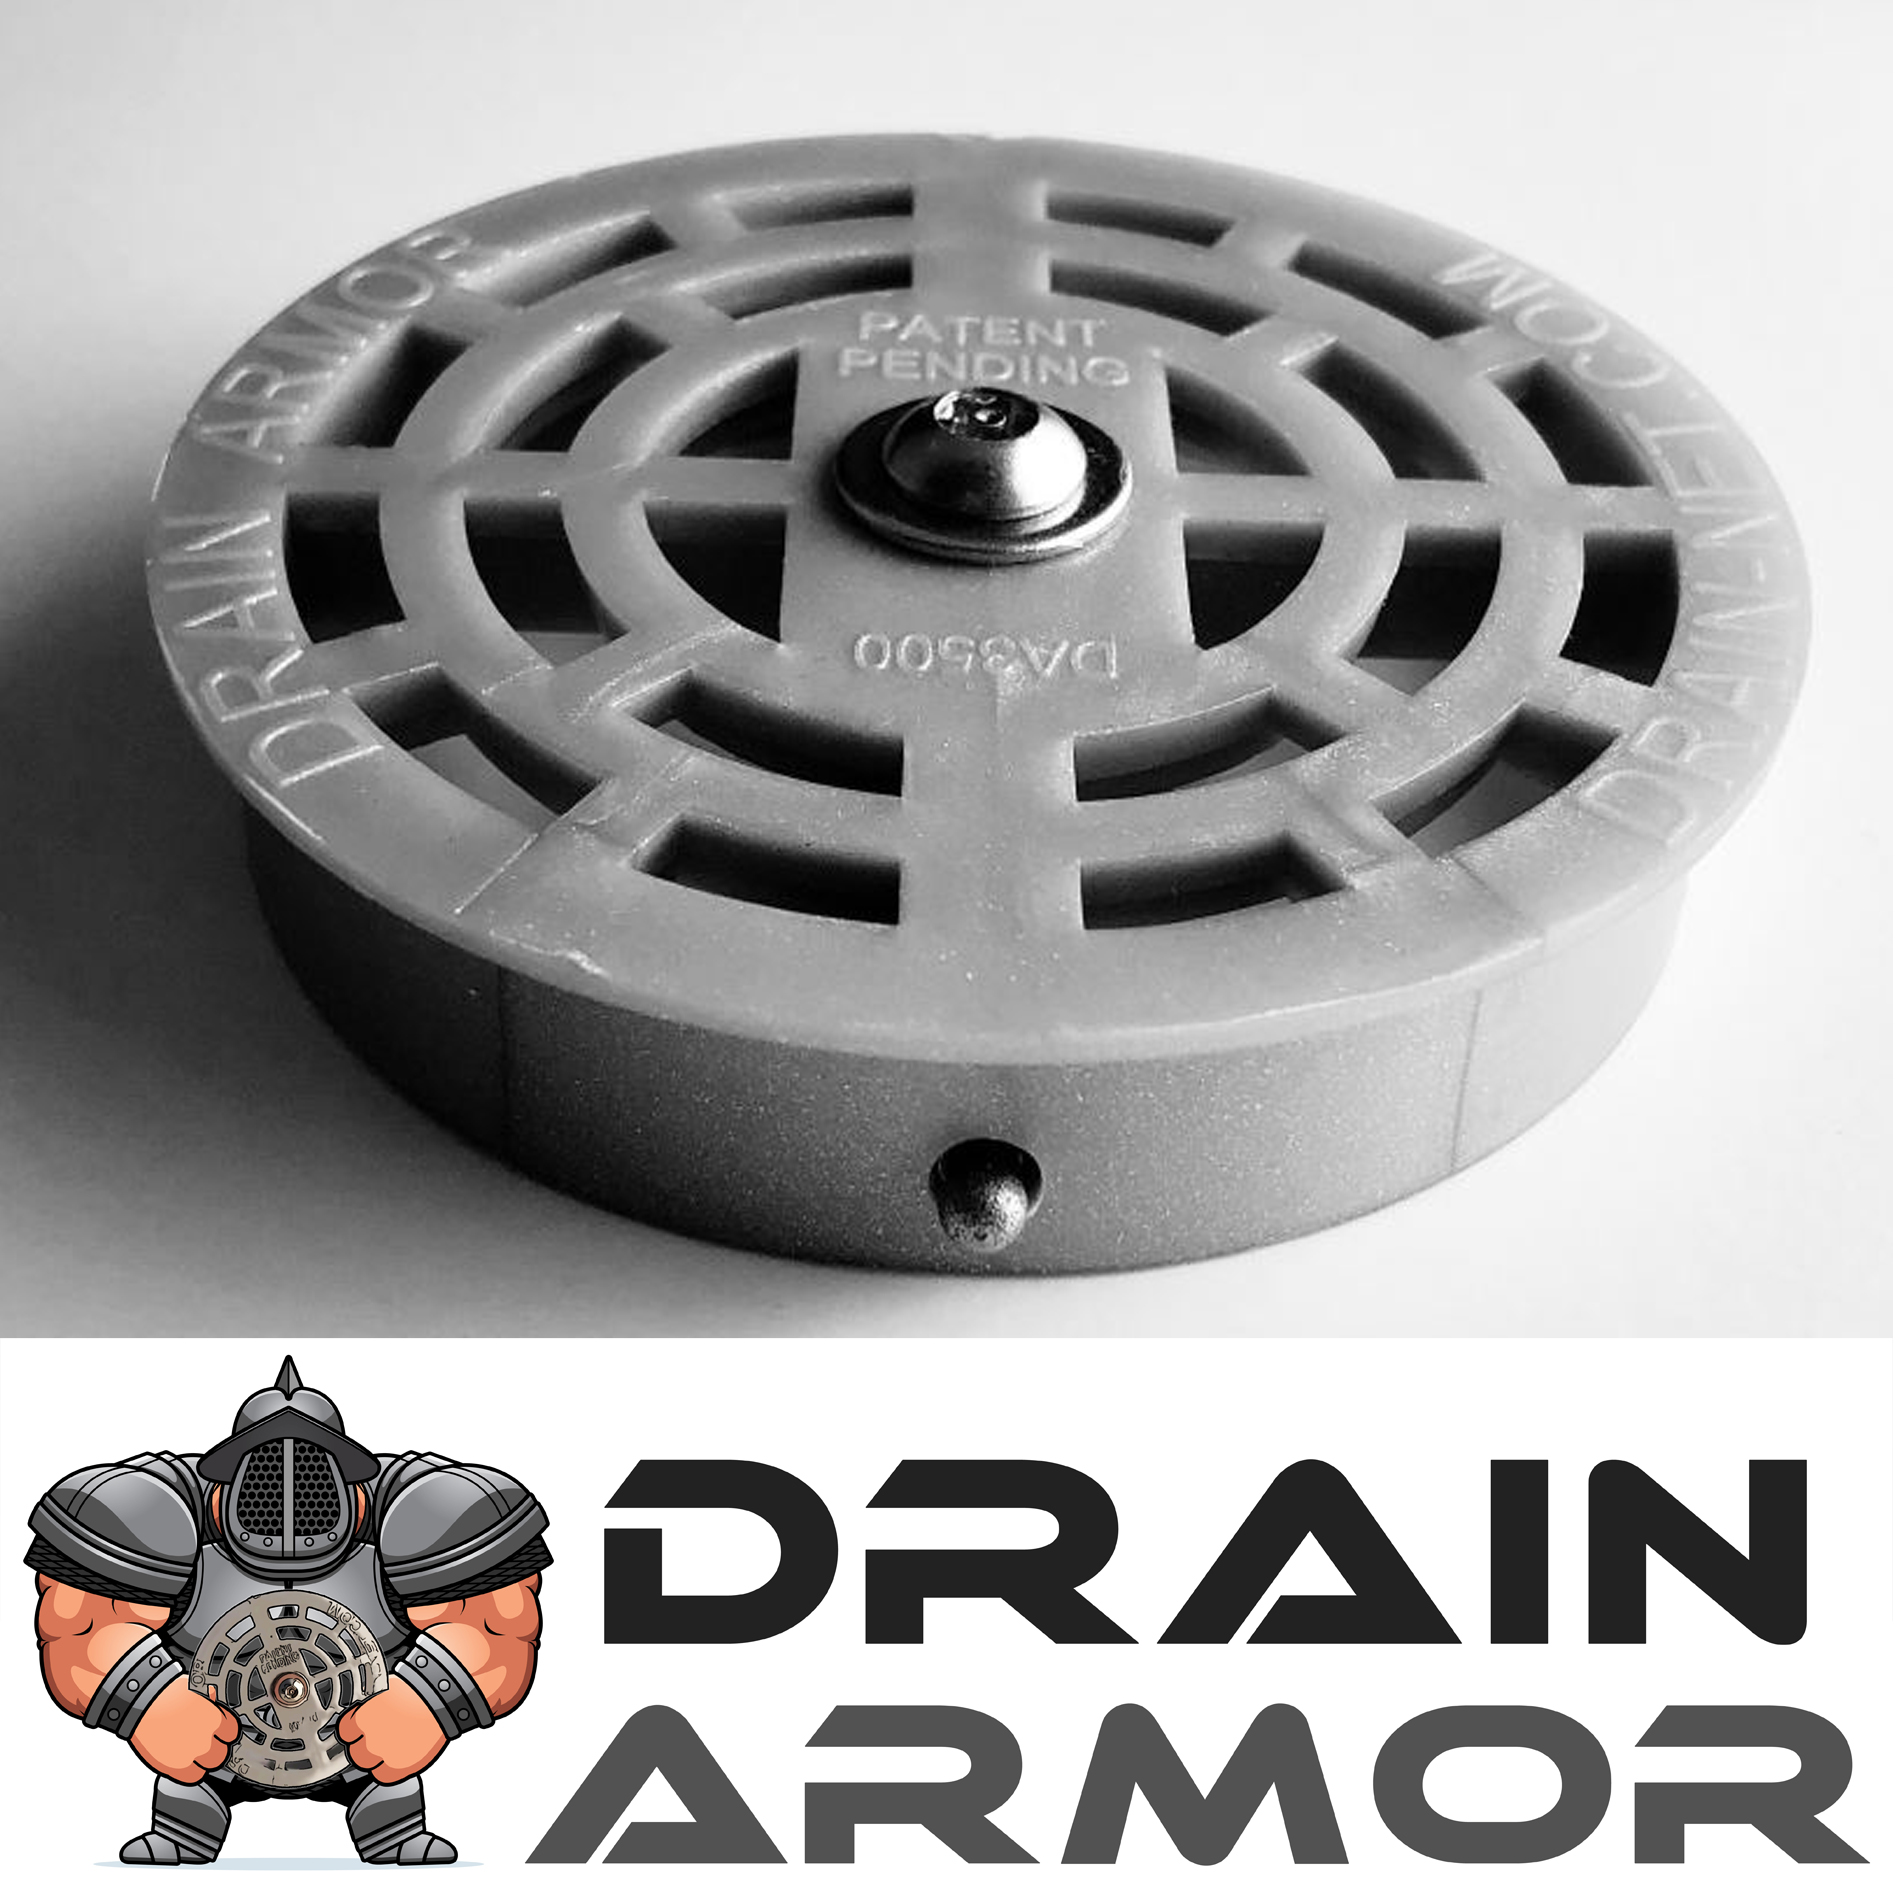 Drain Armor 3 5 Locking Sink Strainer Works With All Sink Drains